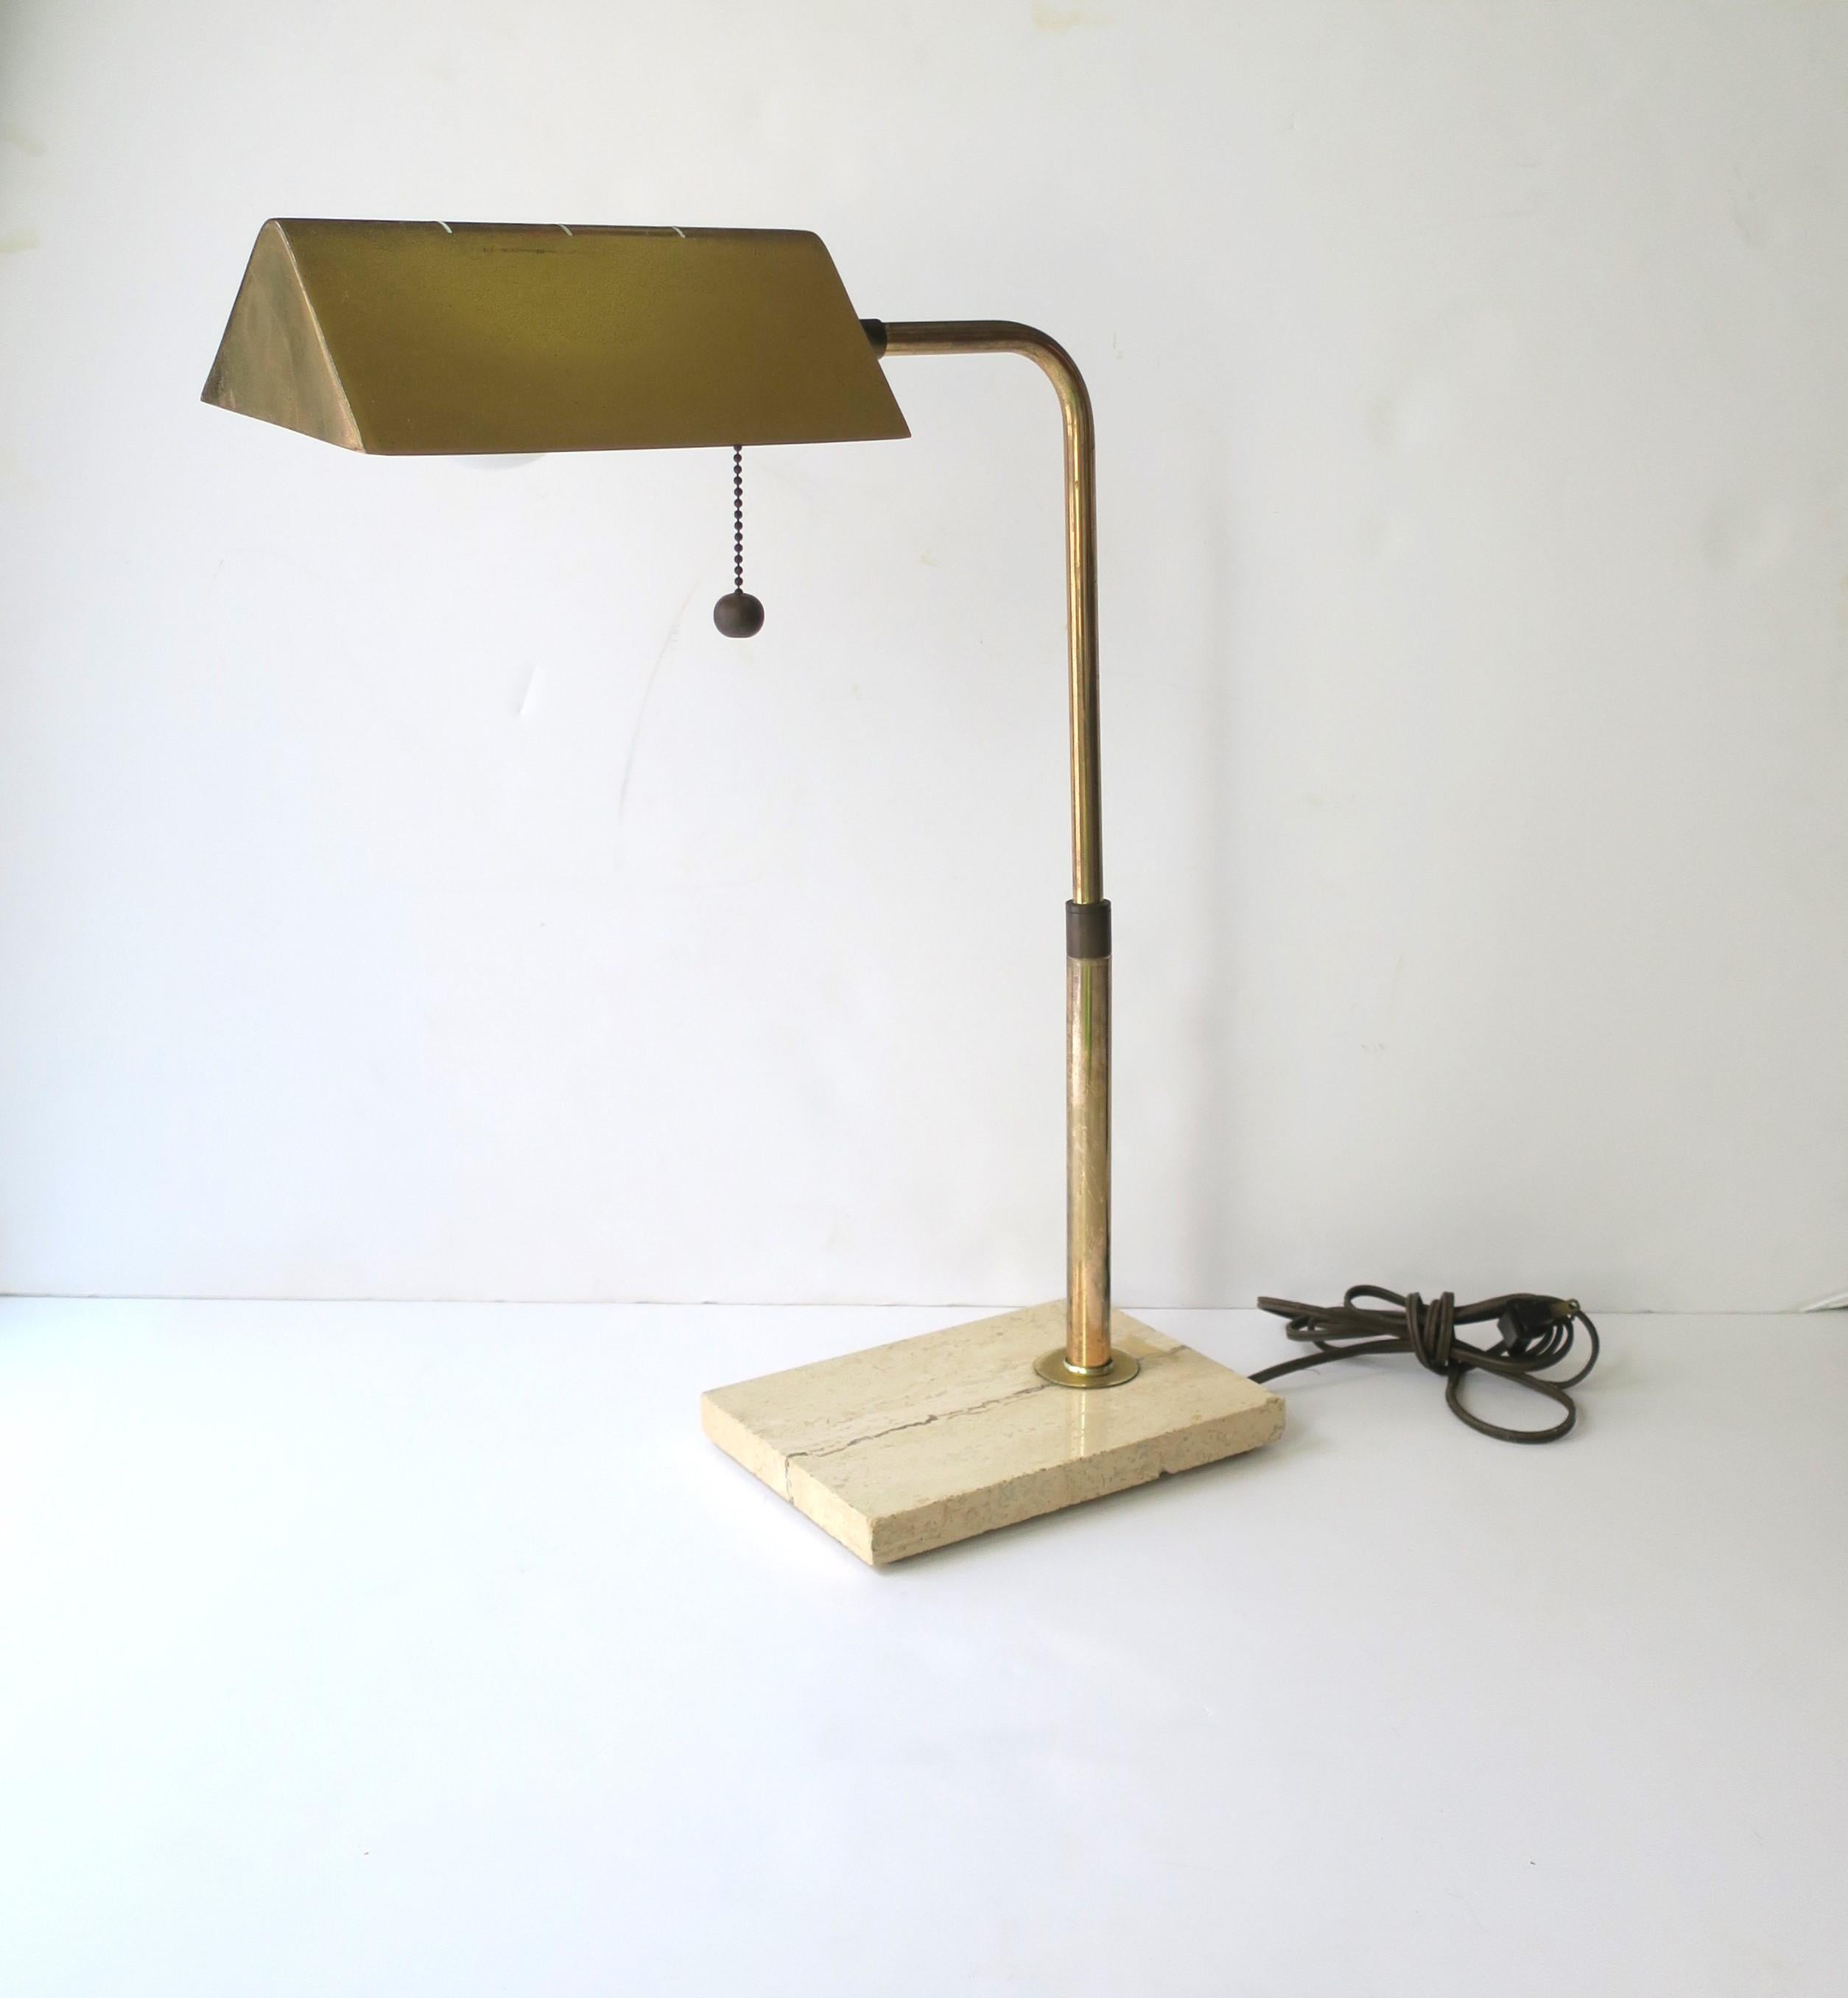 Italian Brass and Travertine Marble Desk or Table Lamp, circa 1960s 1970s For Sale 1